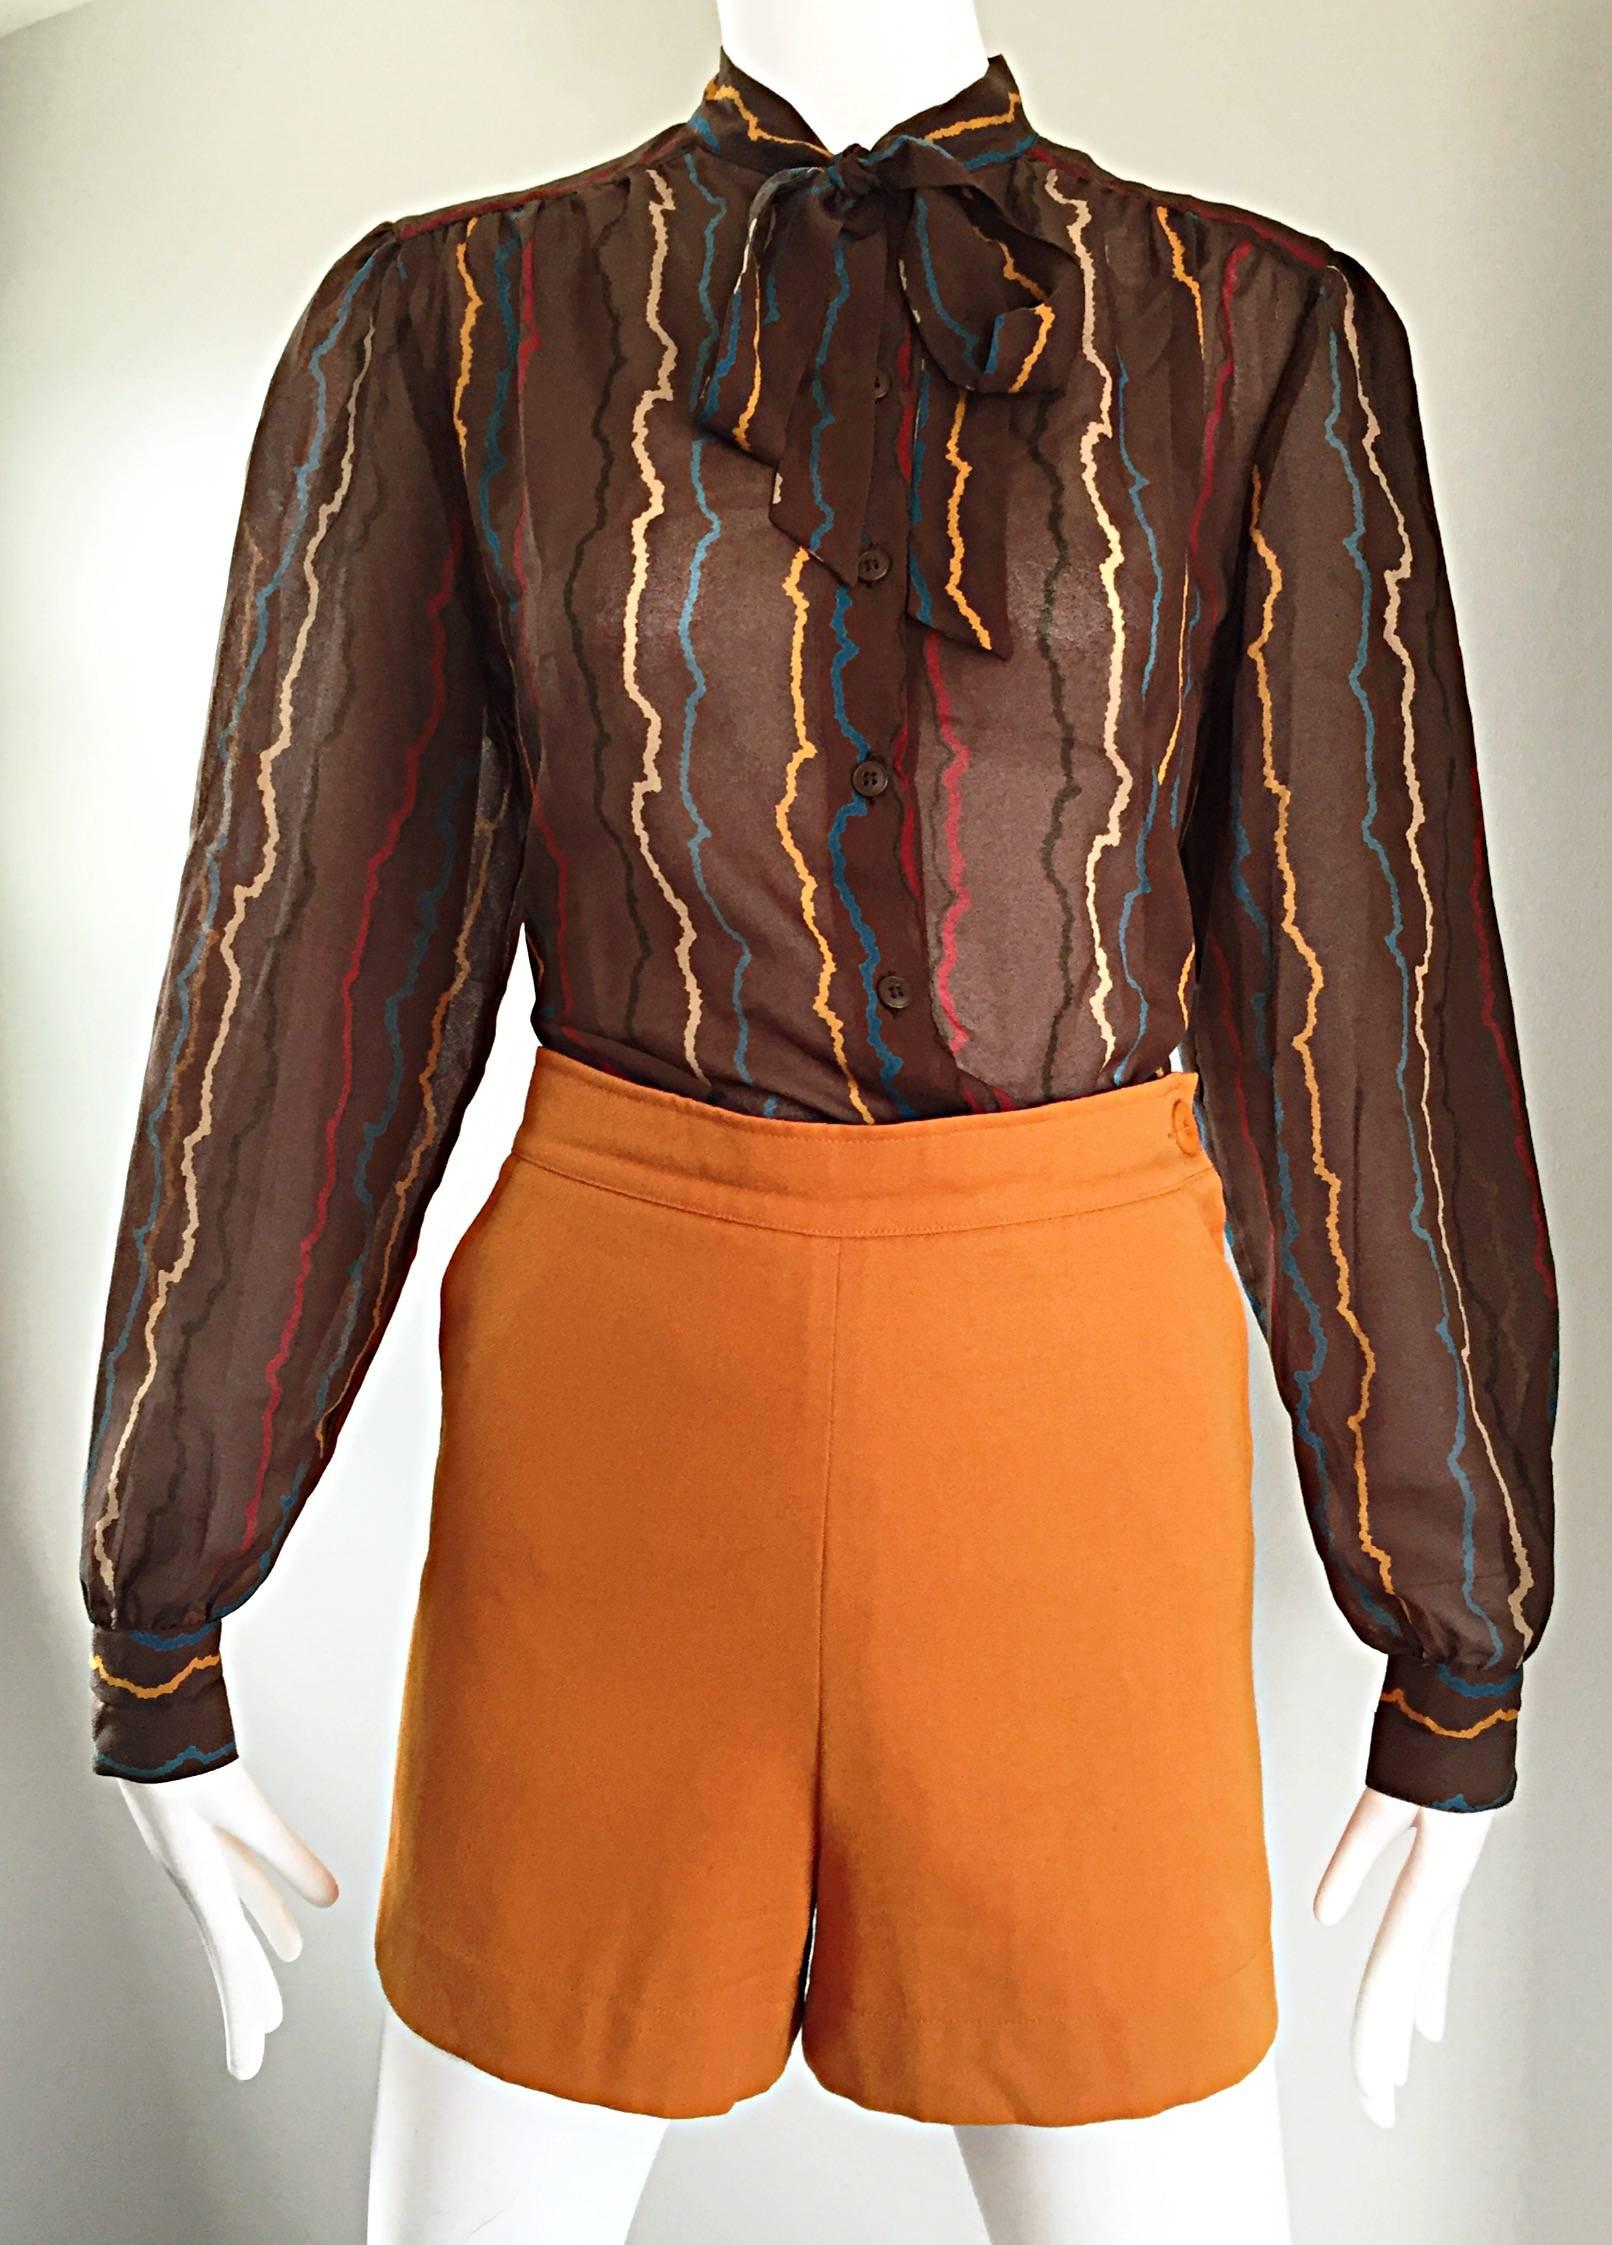 Chic vintage 1980s MONDI semi sheer silk taupe Pussycat bow blouse! Features sgwiggles of color throughout in yellow, red, blue, taupe and black throughout. Buttons up the bodice, with a self-tying bow at neck. Buttons at each sleeve cuff. Great